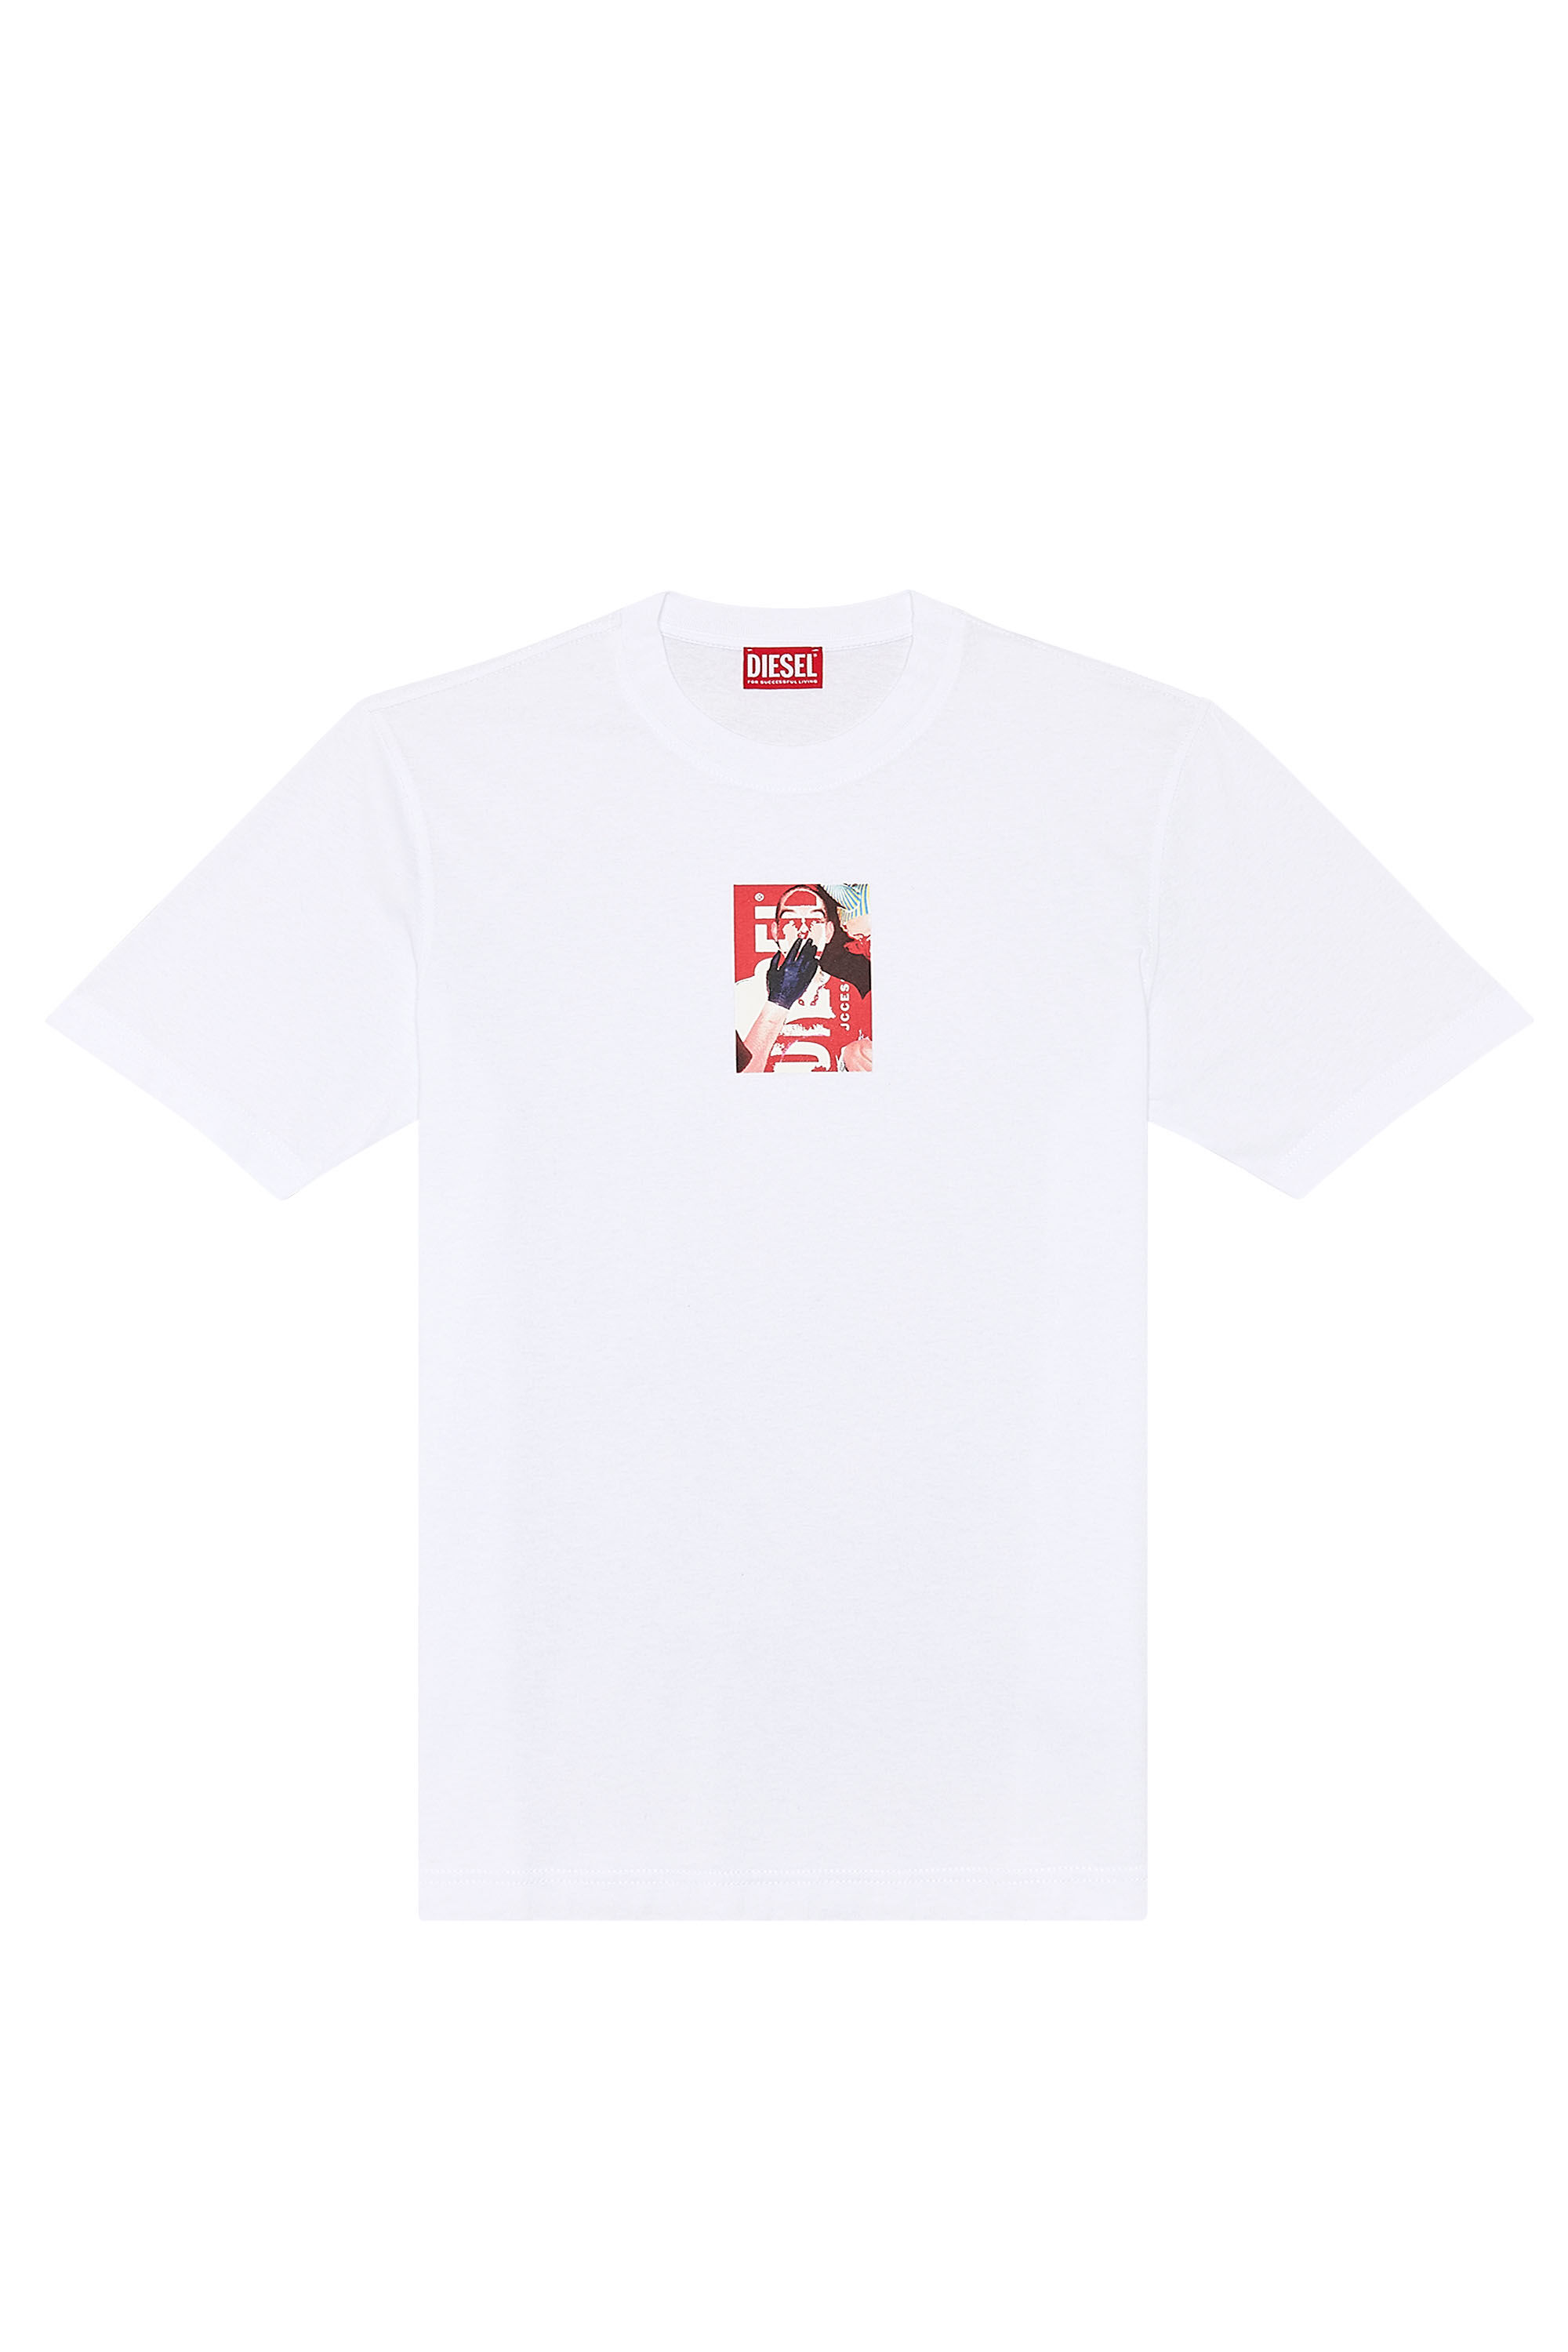 Diesel - T-JUST-N11, Man T-shirt with photo print logo in White - Image 2